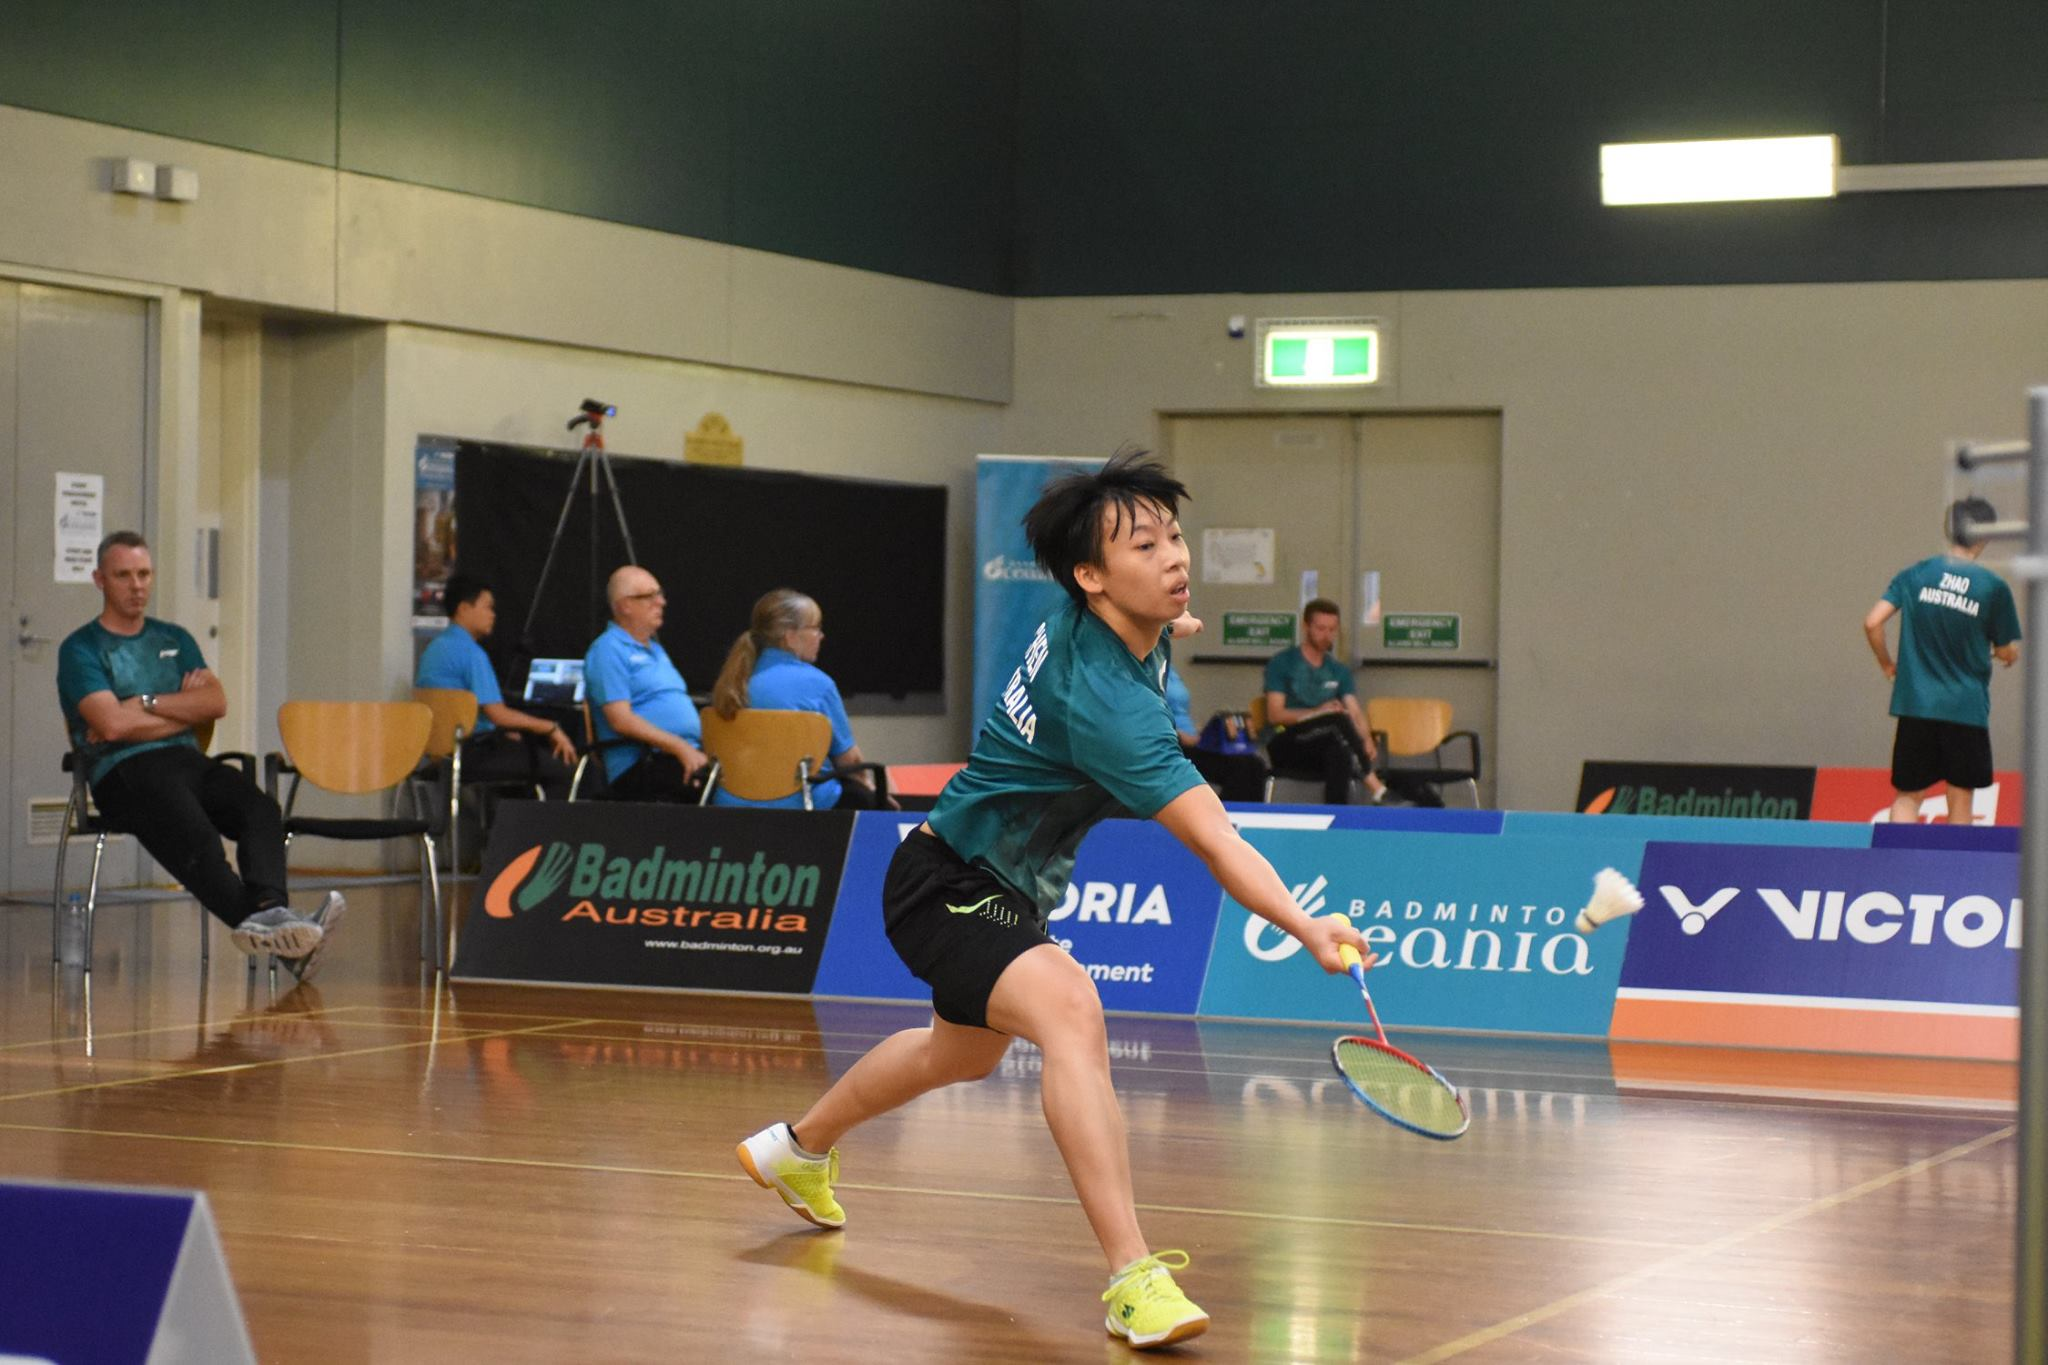 Australia overcame New Zealand 3-2 in both the open and junior events to secure double gold medals ©Badminton Oceania